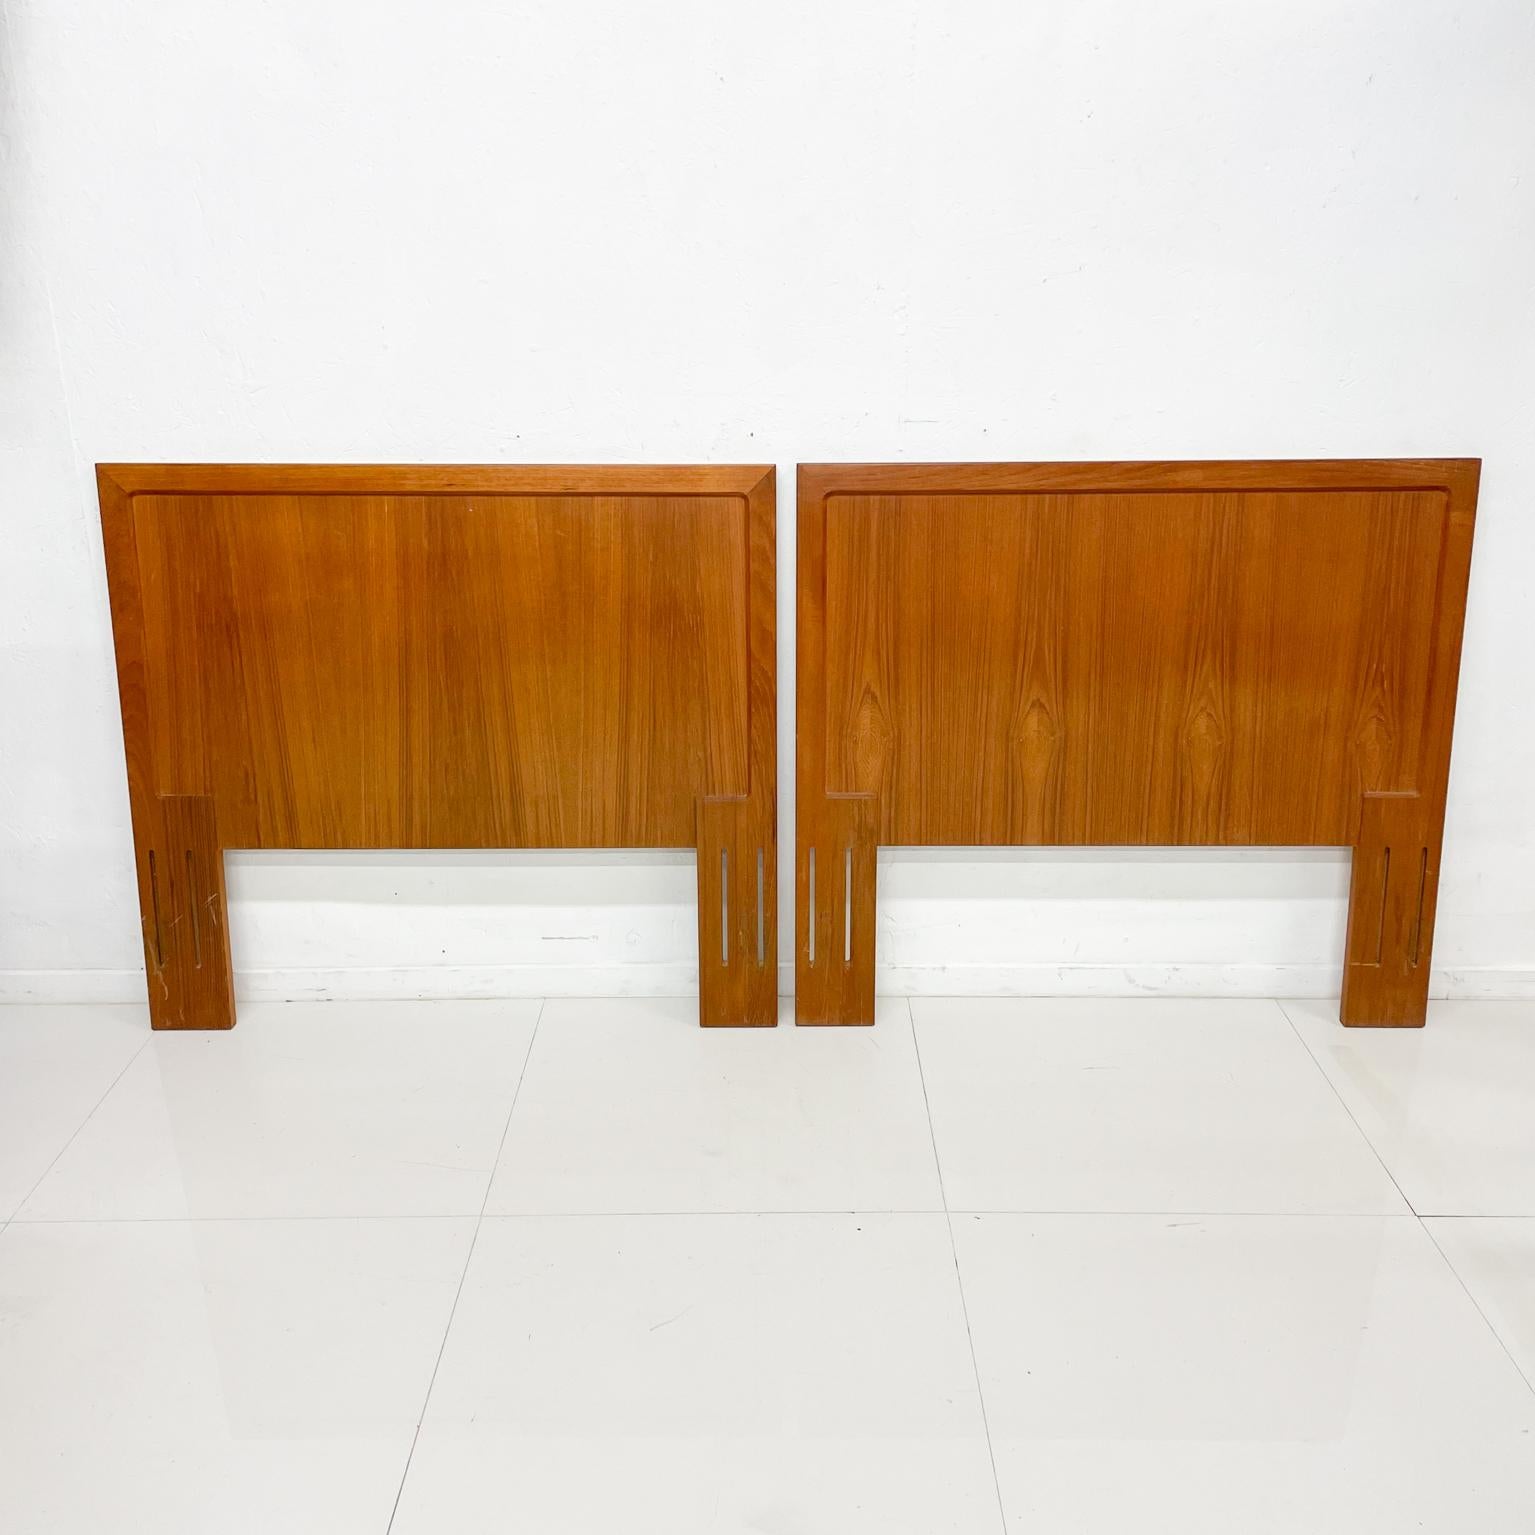 Danish Pair of Twin TEAK Headboards by Vinde Mobelfabrik. 
Listing is for headboards only.
Possibly can double up to configure as a king headboard.
Maker stamped. Denmark 75.
Style of Moreddi.
One headboard has minor scuffs in upper right